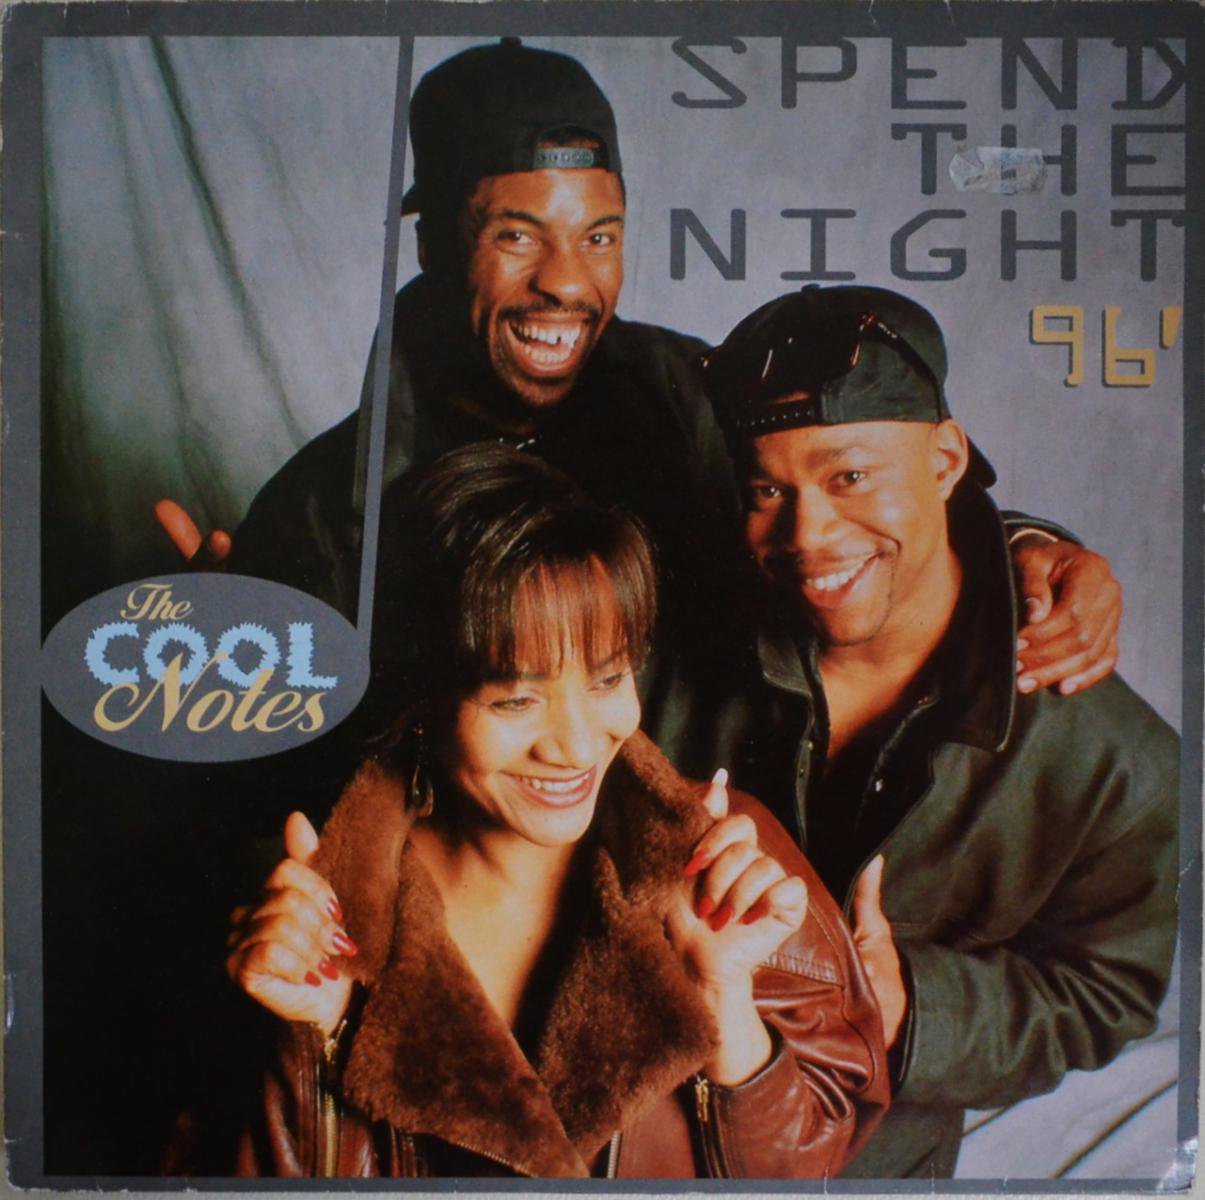 THE COOL NOTES / SPEND THE NIGHT '96 / ANN-MARIE (GERMANY) (12